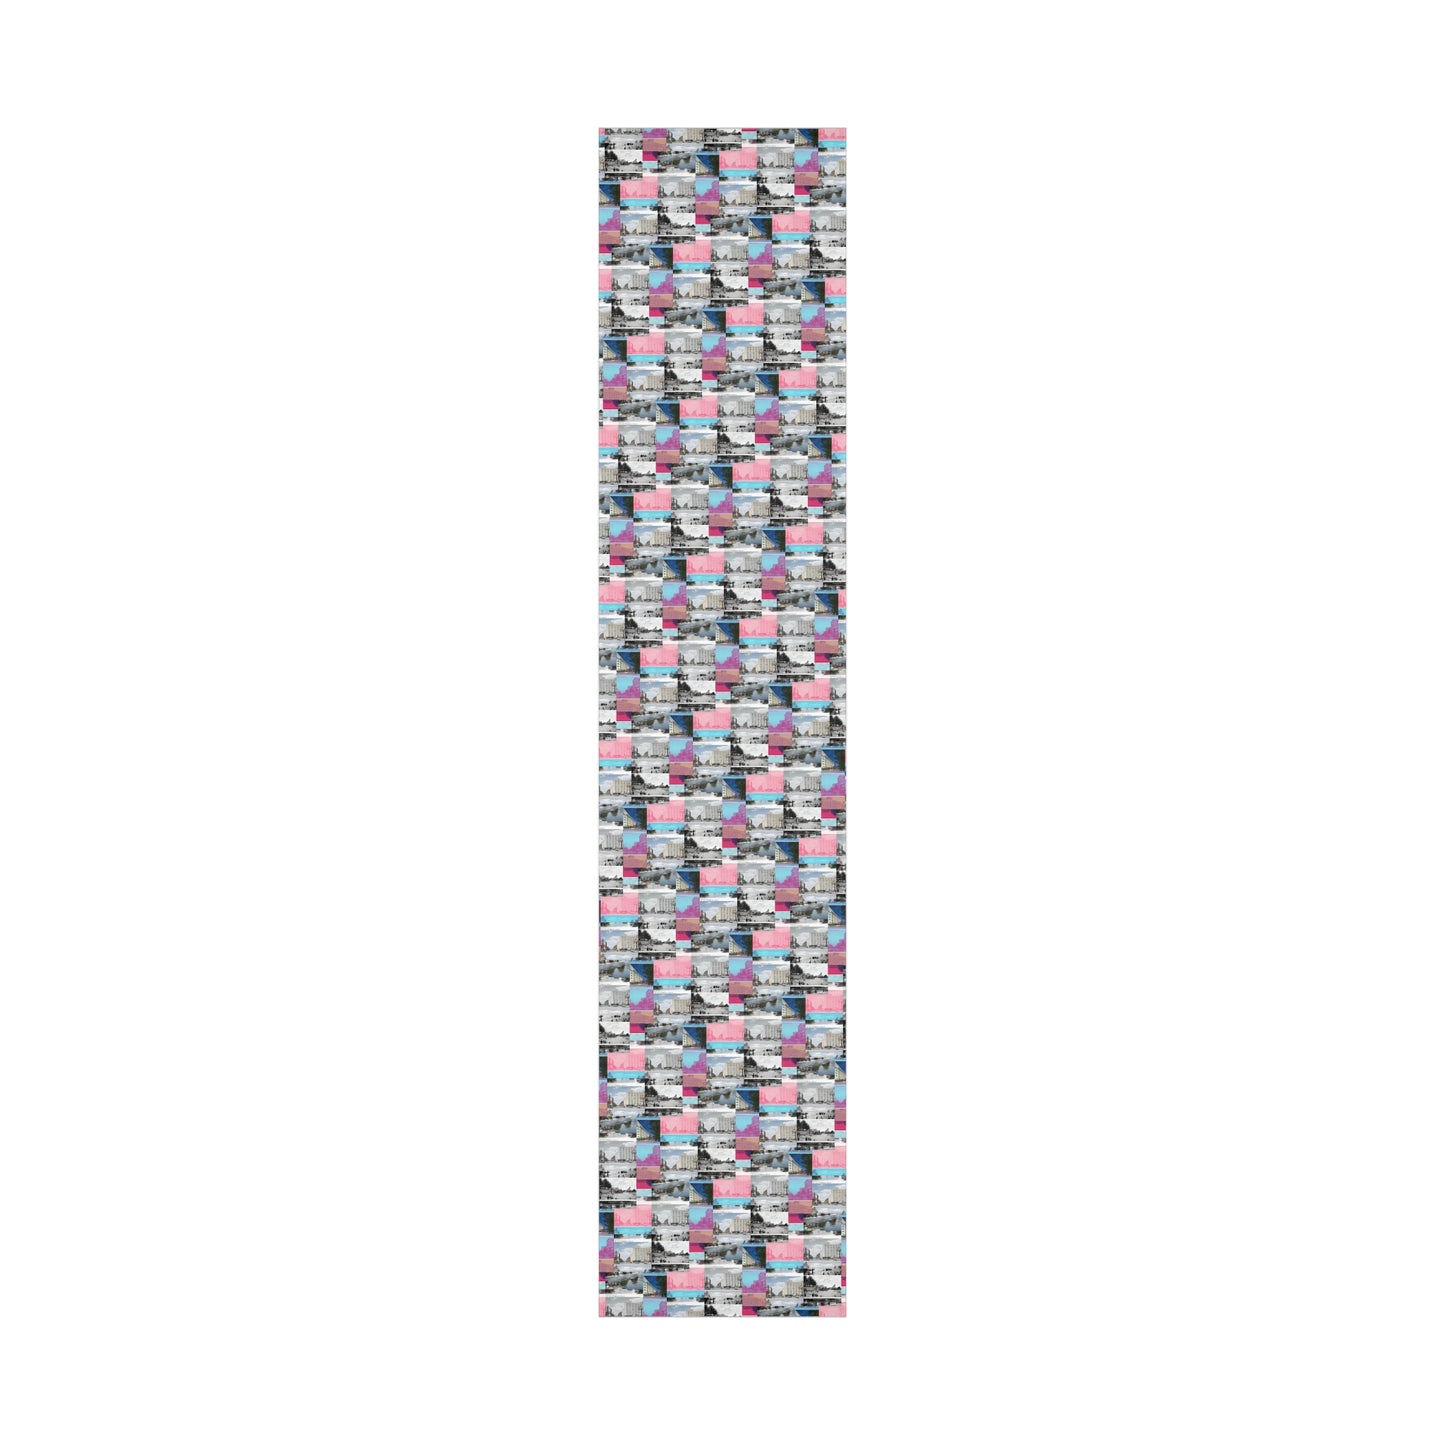 45840 Postcards Gift Wrap Paper